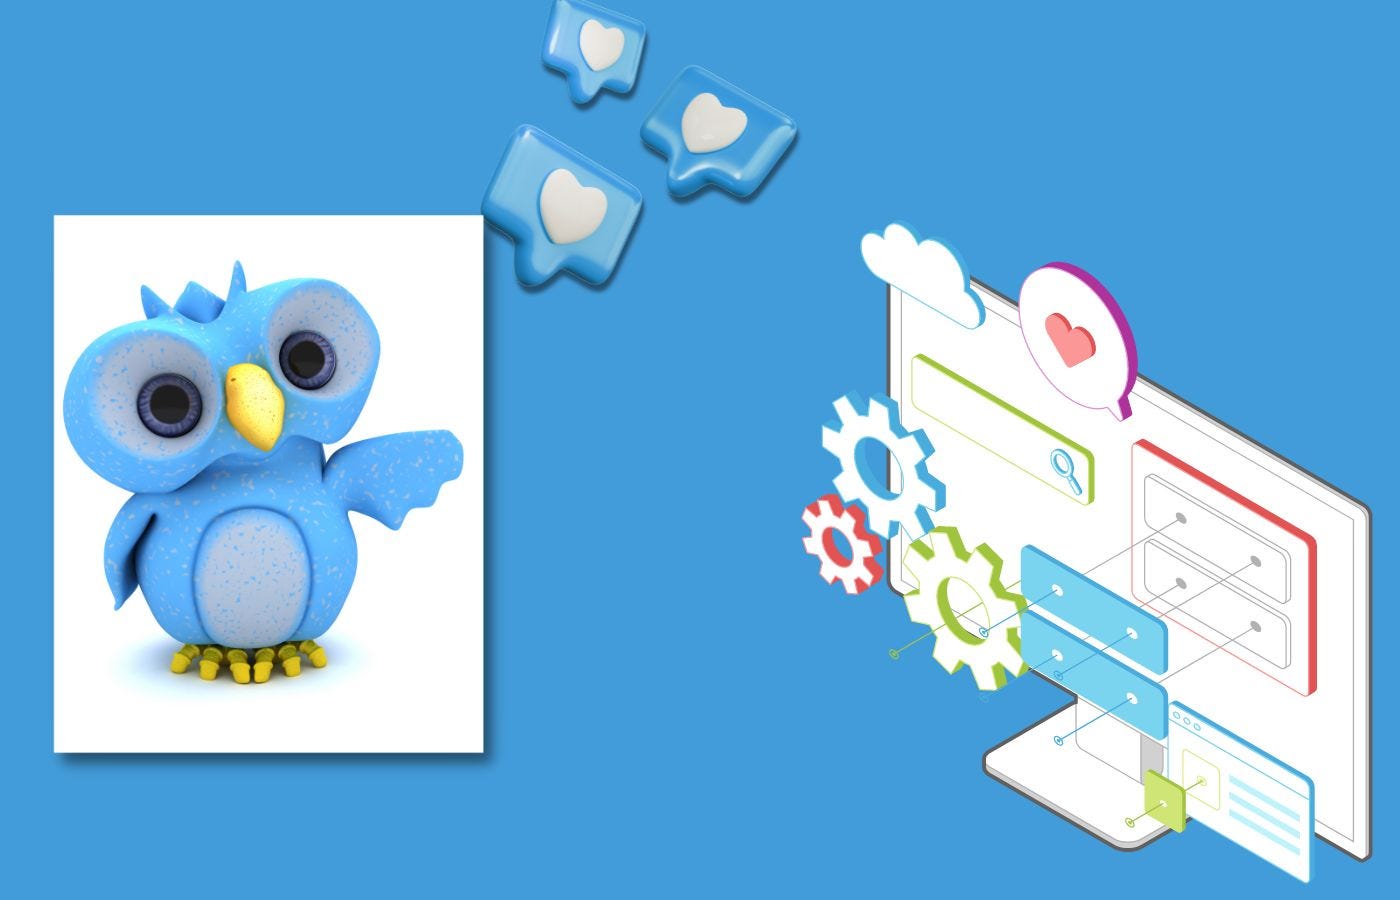 Twitter Images 101: Easy Tips for Digital Writers to Maximize Your Content